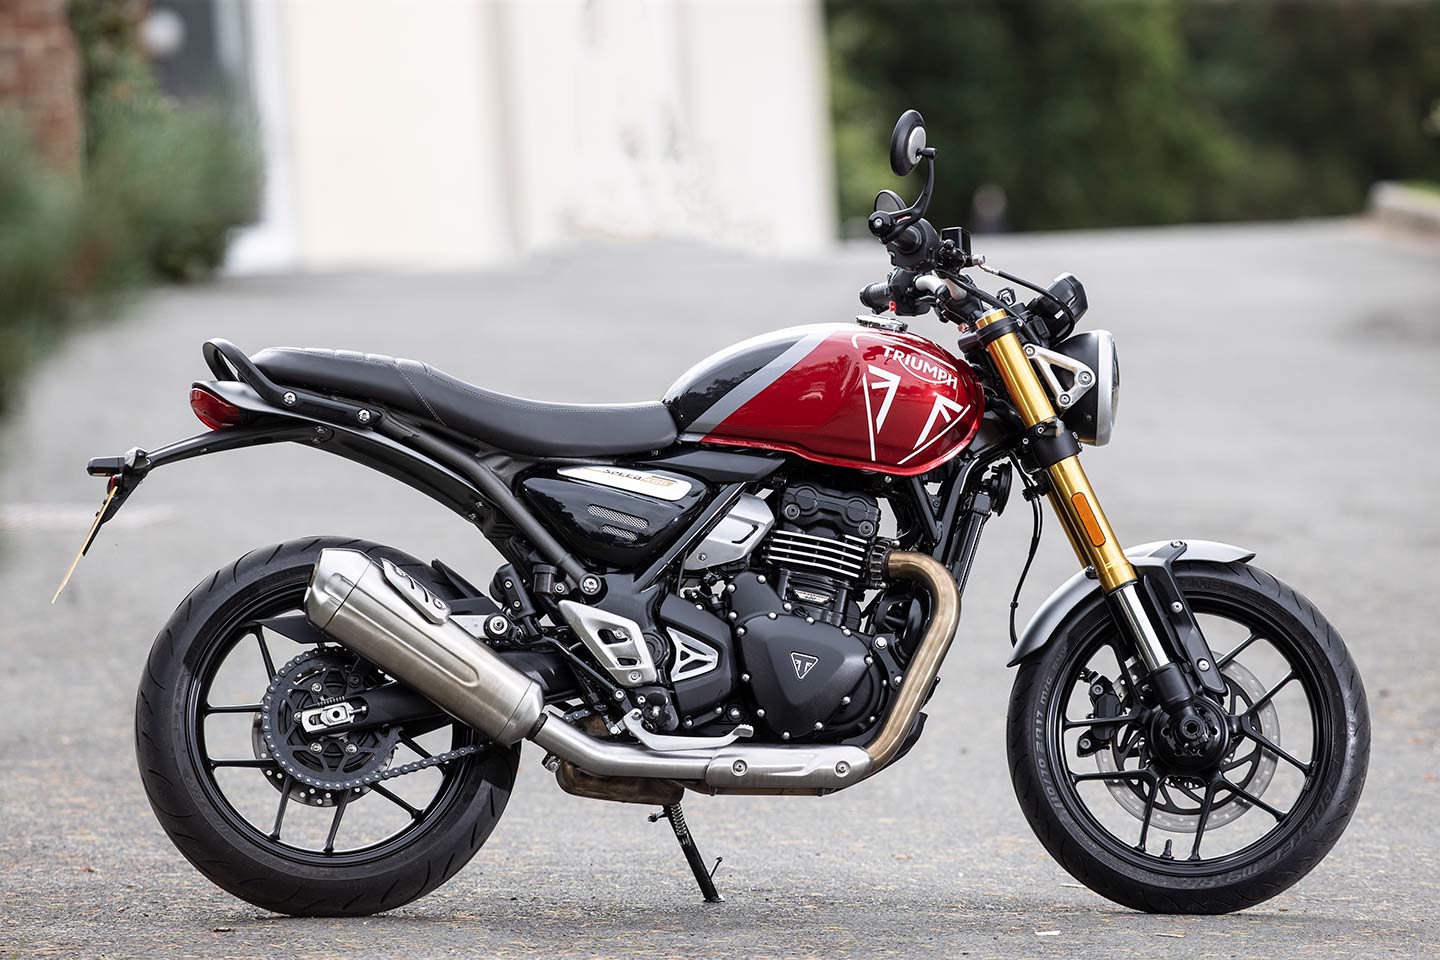 The big question is what price Triumph will put on the Speed 400 when it arrives in the US.